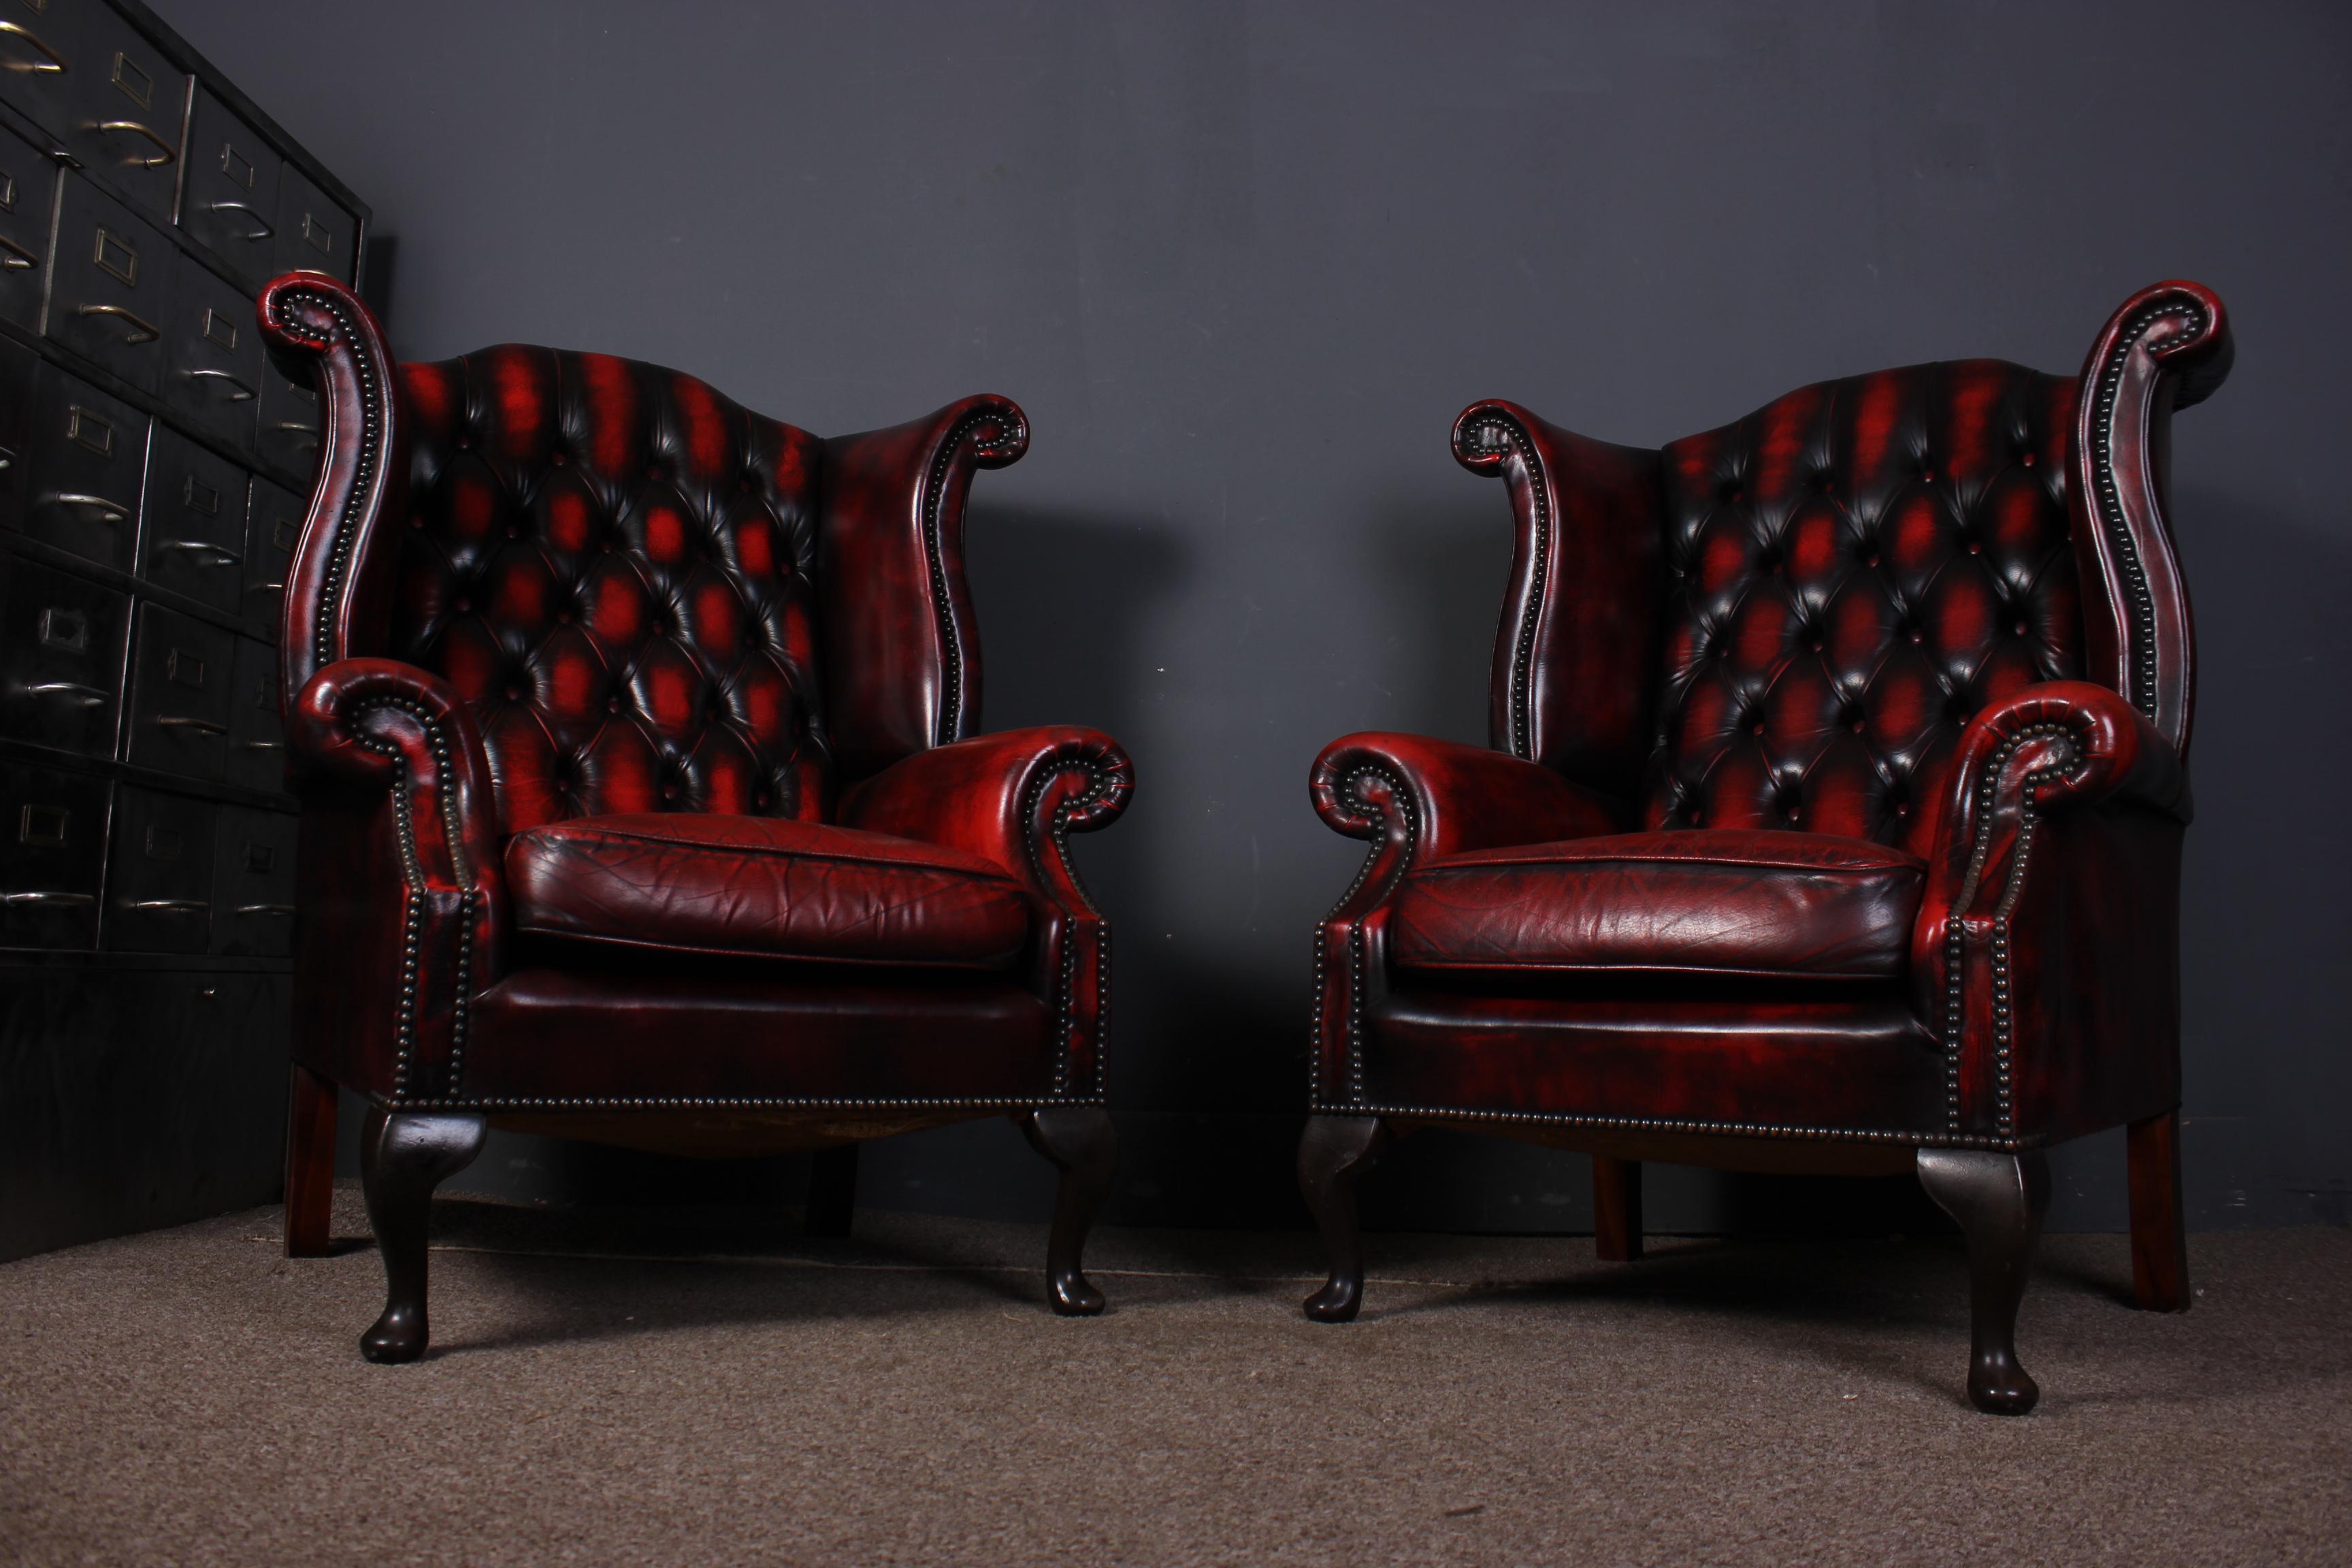 A classic pair of chesterfield Queen Anne wing chairs in a stunning oxblood red. They are in good condition with all the buttons intact but do have some minor age related marks due this does not detract from the look.

